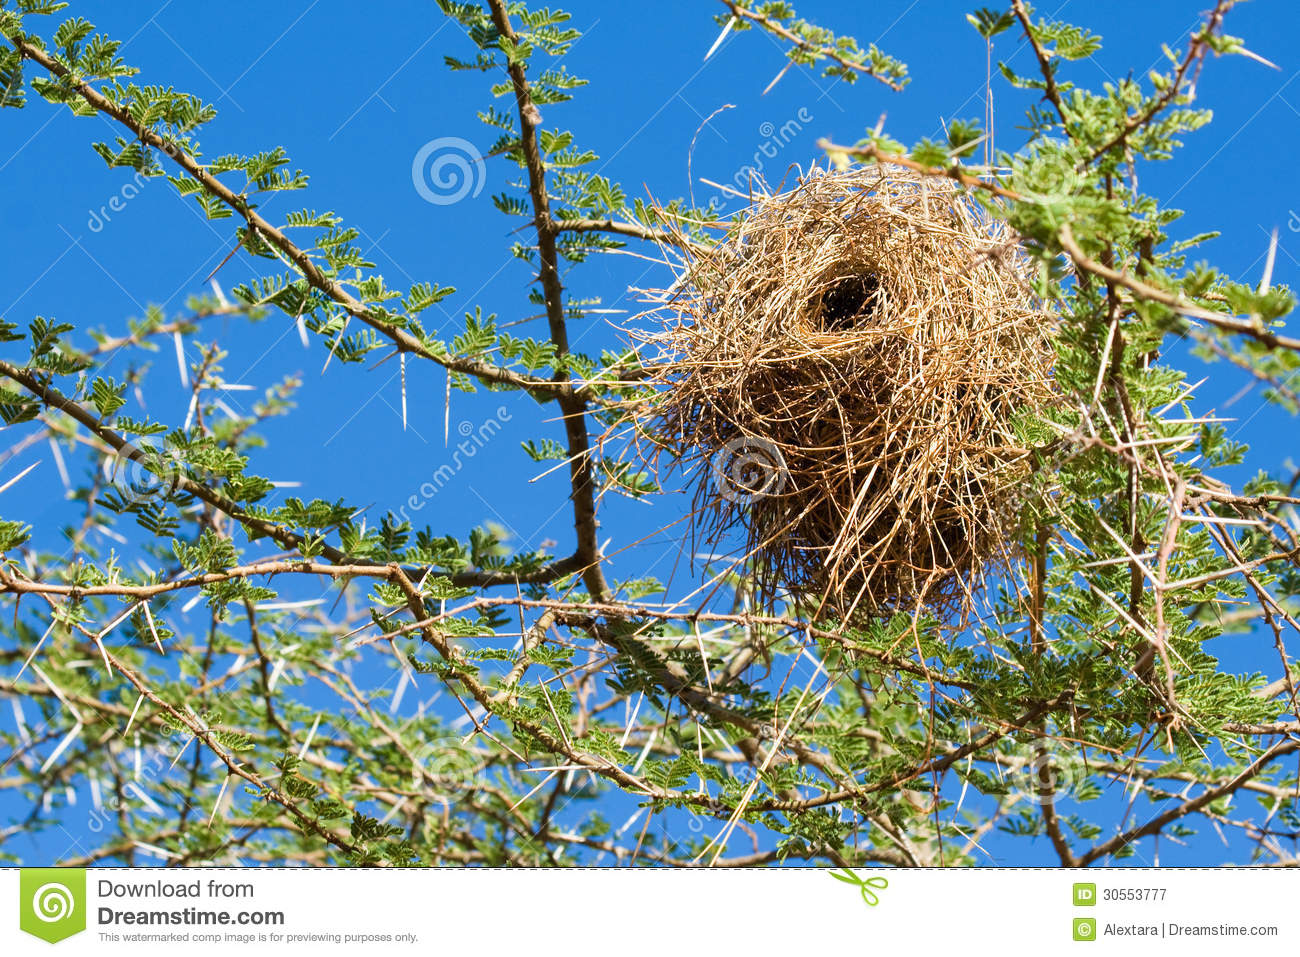 Bird Nest Of Weaver In An African Acacia Tree With Blue Sky Background